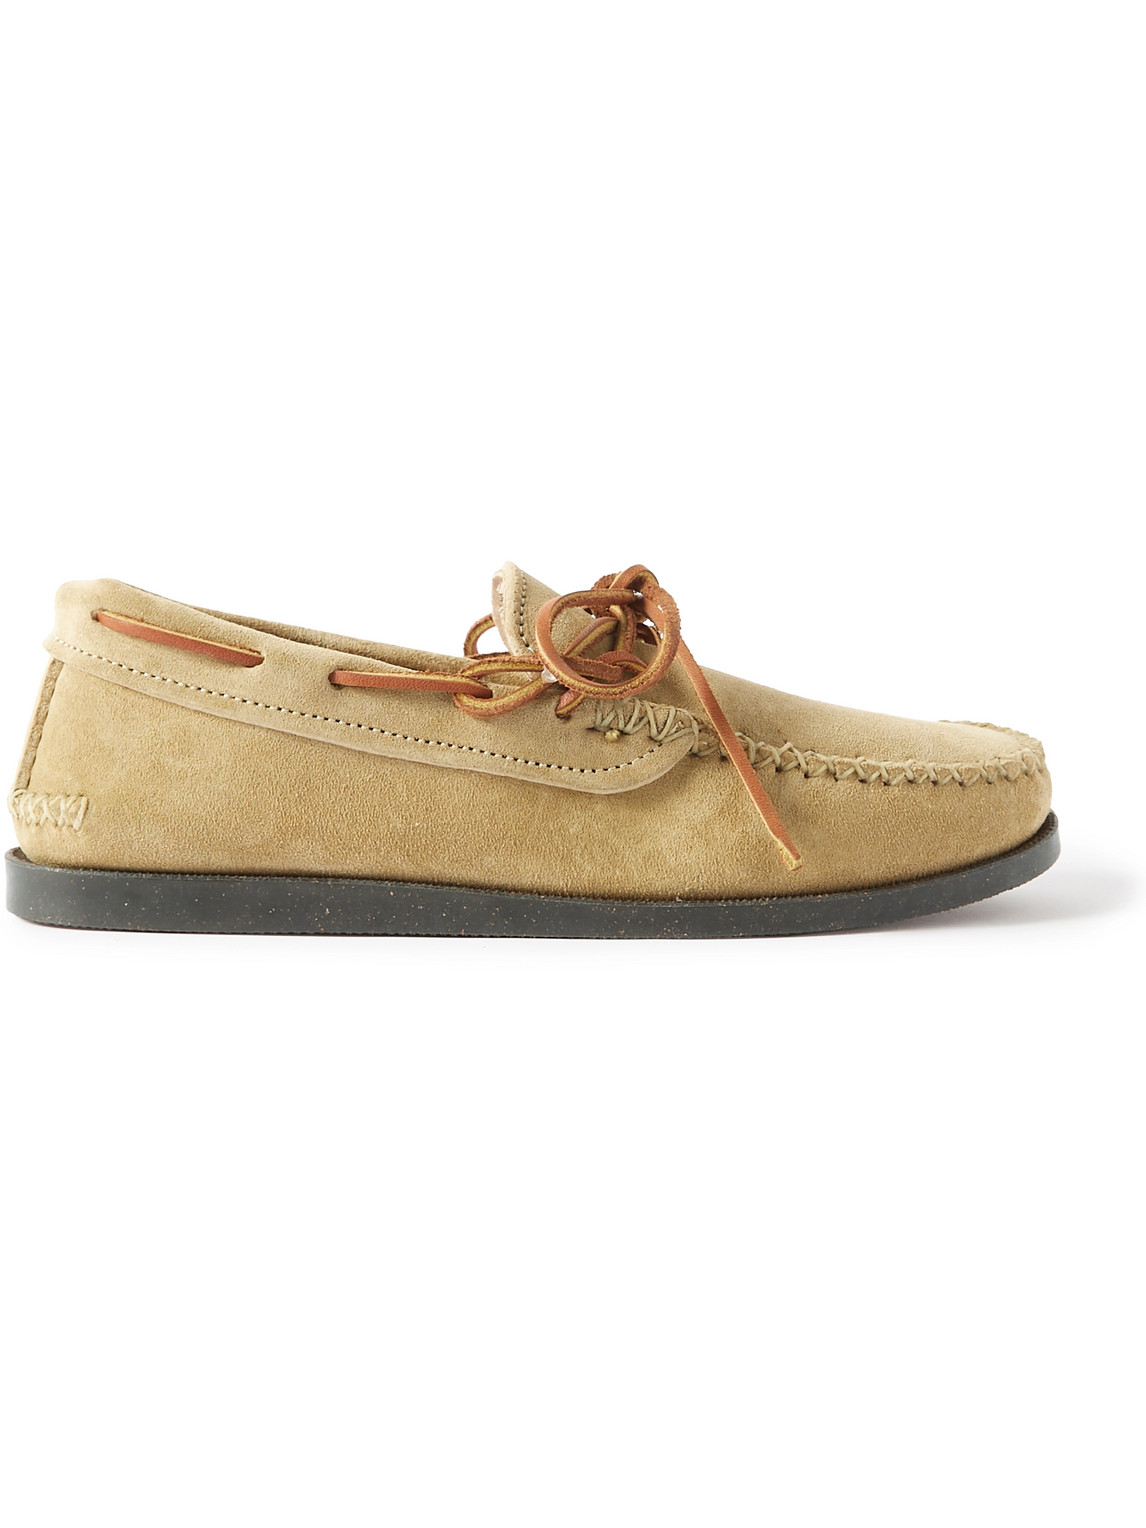 Canoe Suede Boat Shoes